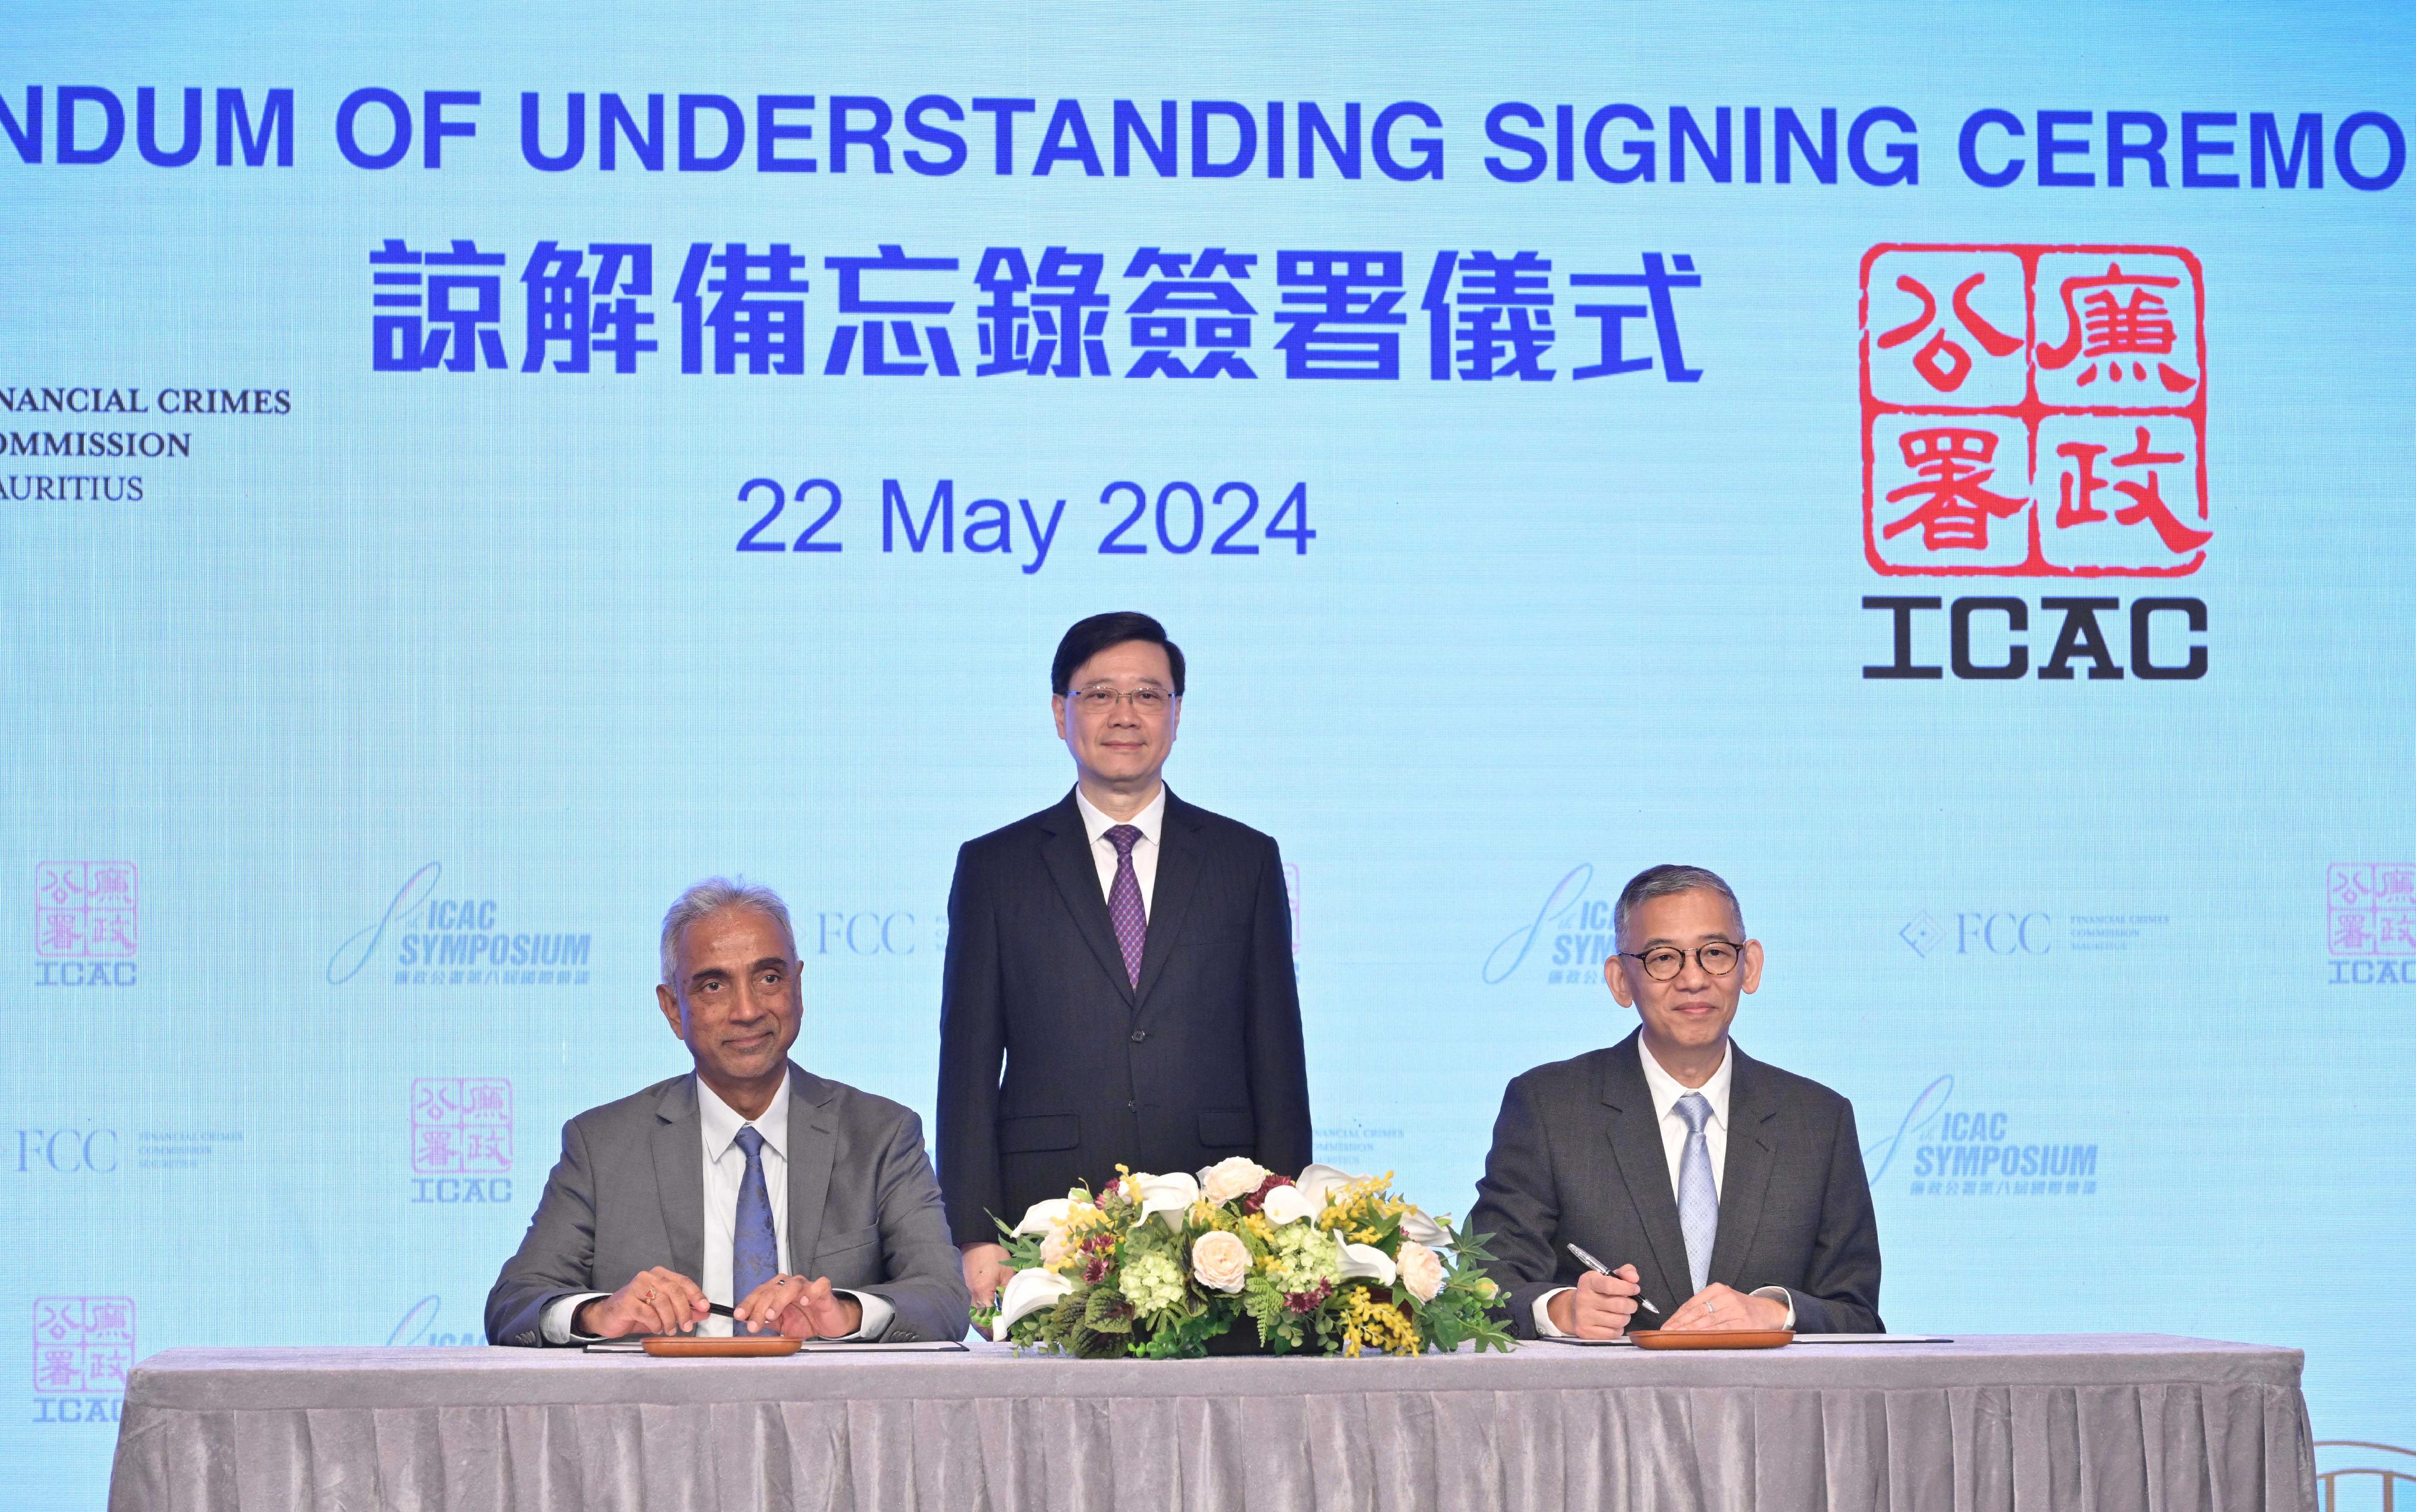 The Chief Executive, Mr John Lee, attended the 8th ICAC (Independent Commission Against Corruption) Symposium today (May 22). Photo shows Mr Lee (centre) witnessing the ICAC Commissioner, Mr Woo Ying-ming (right) and the Director General of the Financial Crimes Commission of Mauritius, Dr Navin Beekarry (left), signing a Memorandum of Understanding.